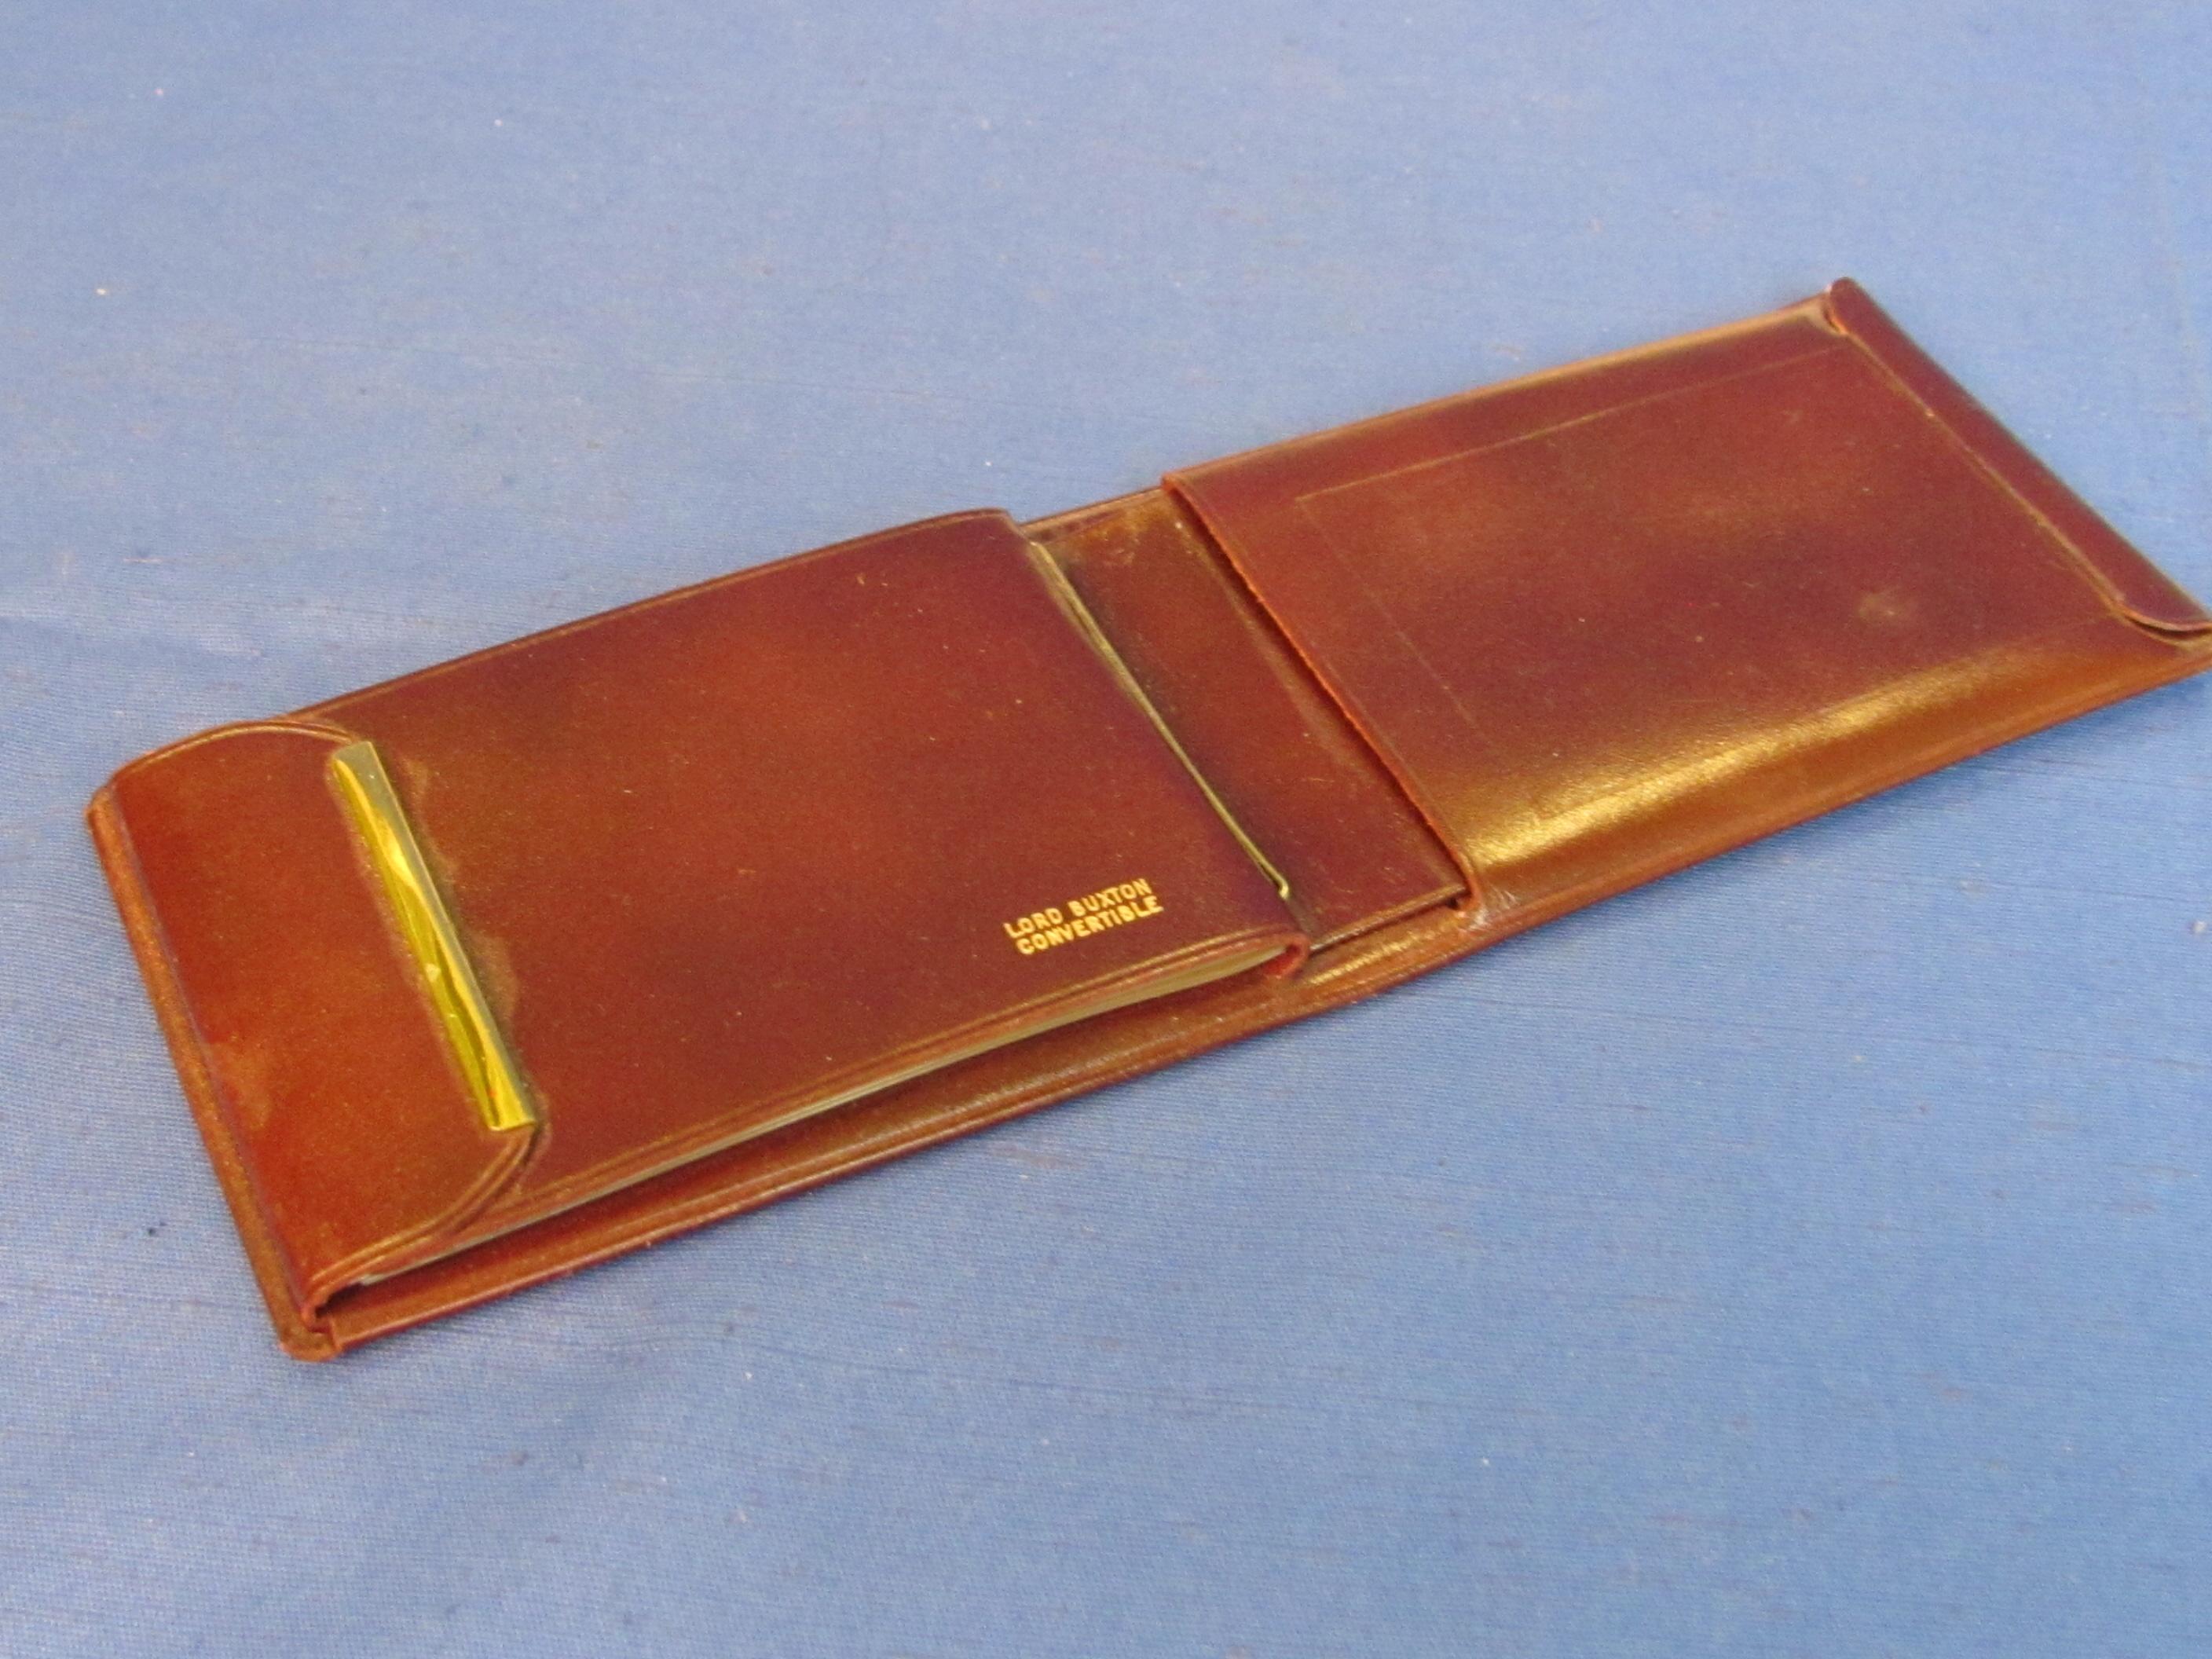 Lord Buxton Convertible Wallet – Top-Grain Cowhide Leather – In Box – New Old Stock